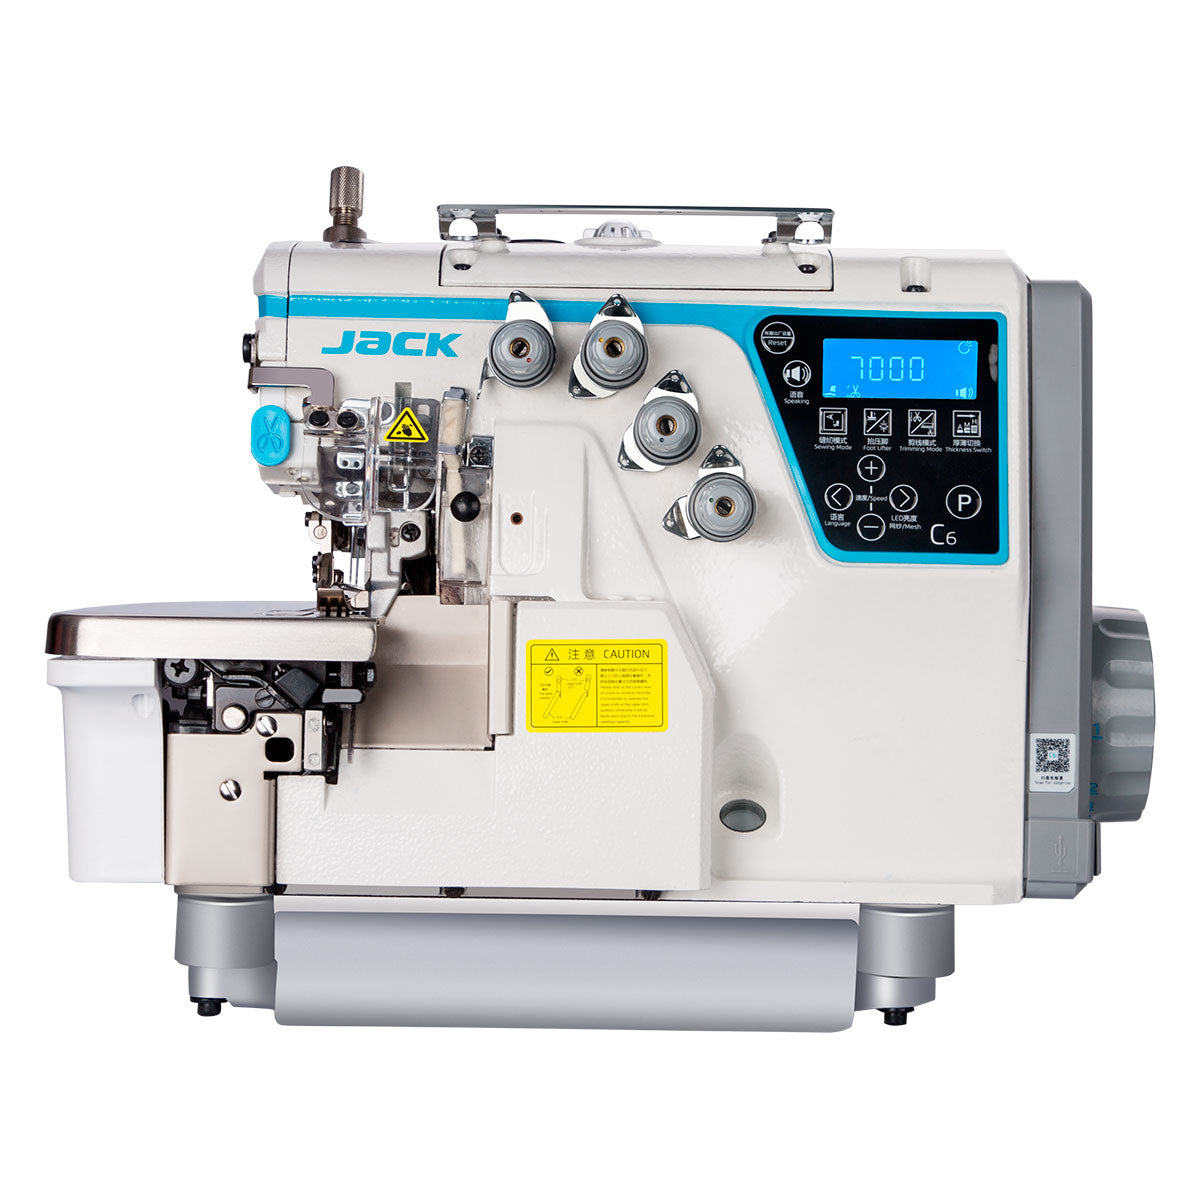 JACK C6-4-M03/333 4 Thread Digital Overlock Machine with Fully Automatic Thickness Adjustment Assembled with Table and Stand Included